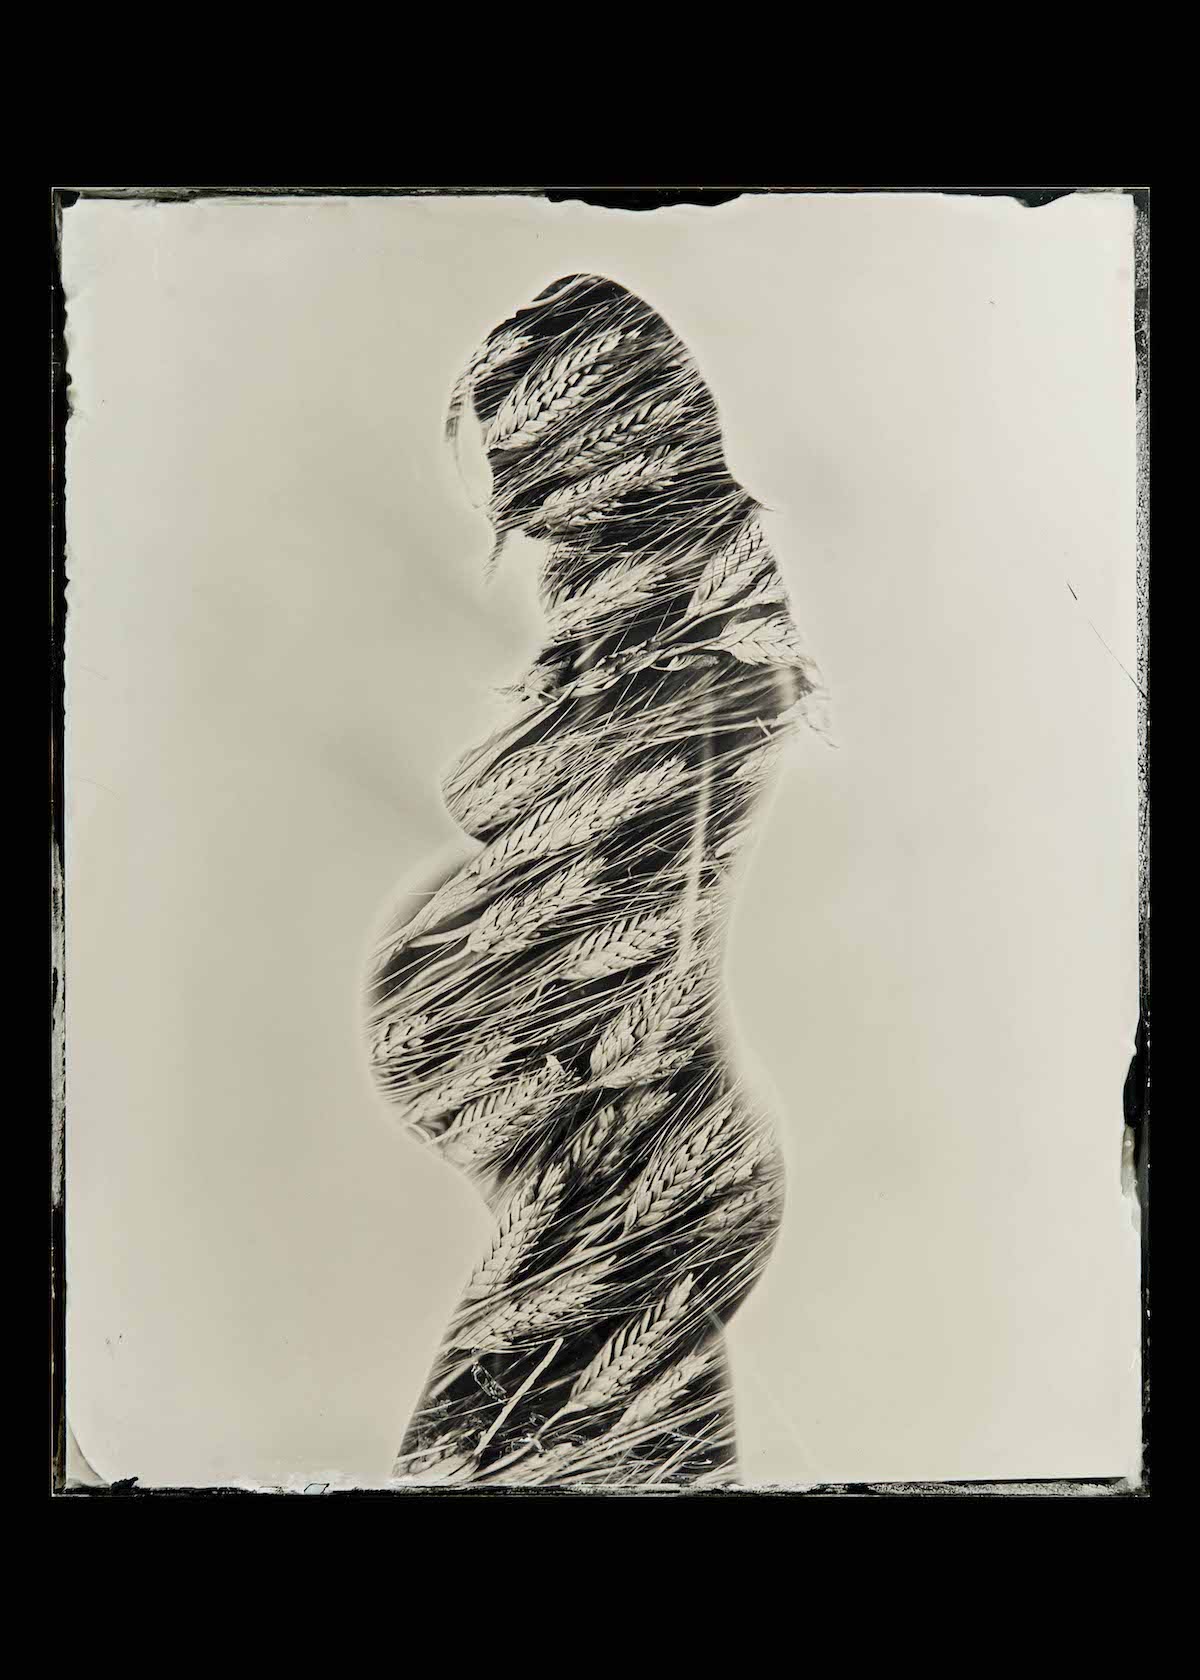 Wet Plate Competition 2019 Wet Plate Photography